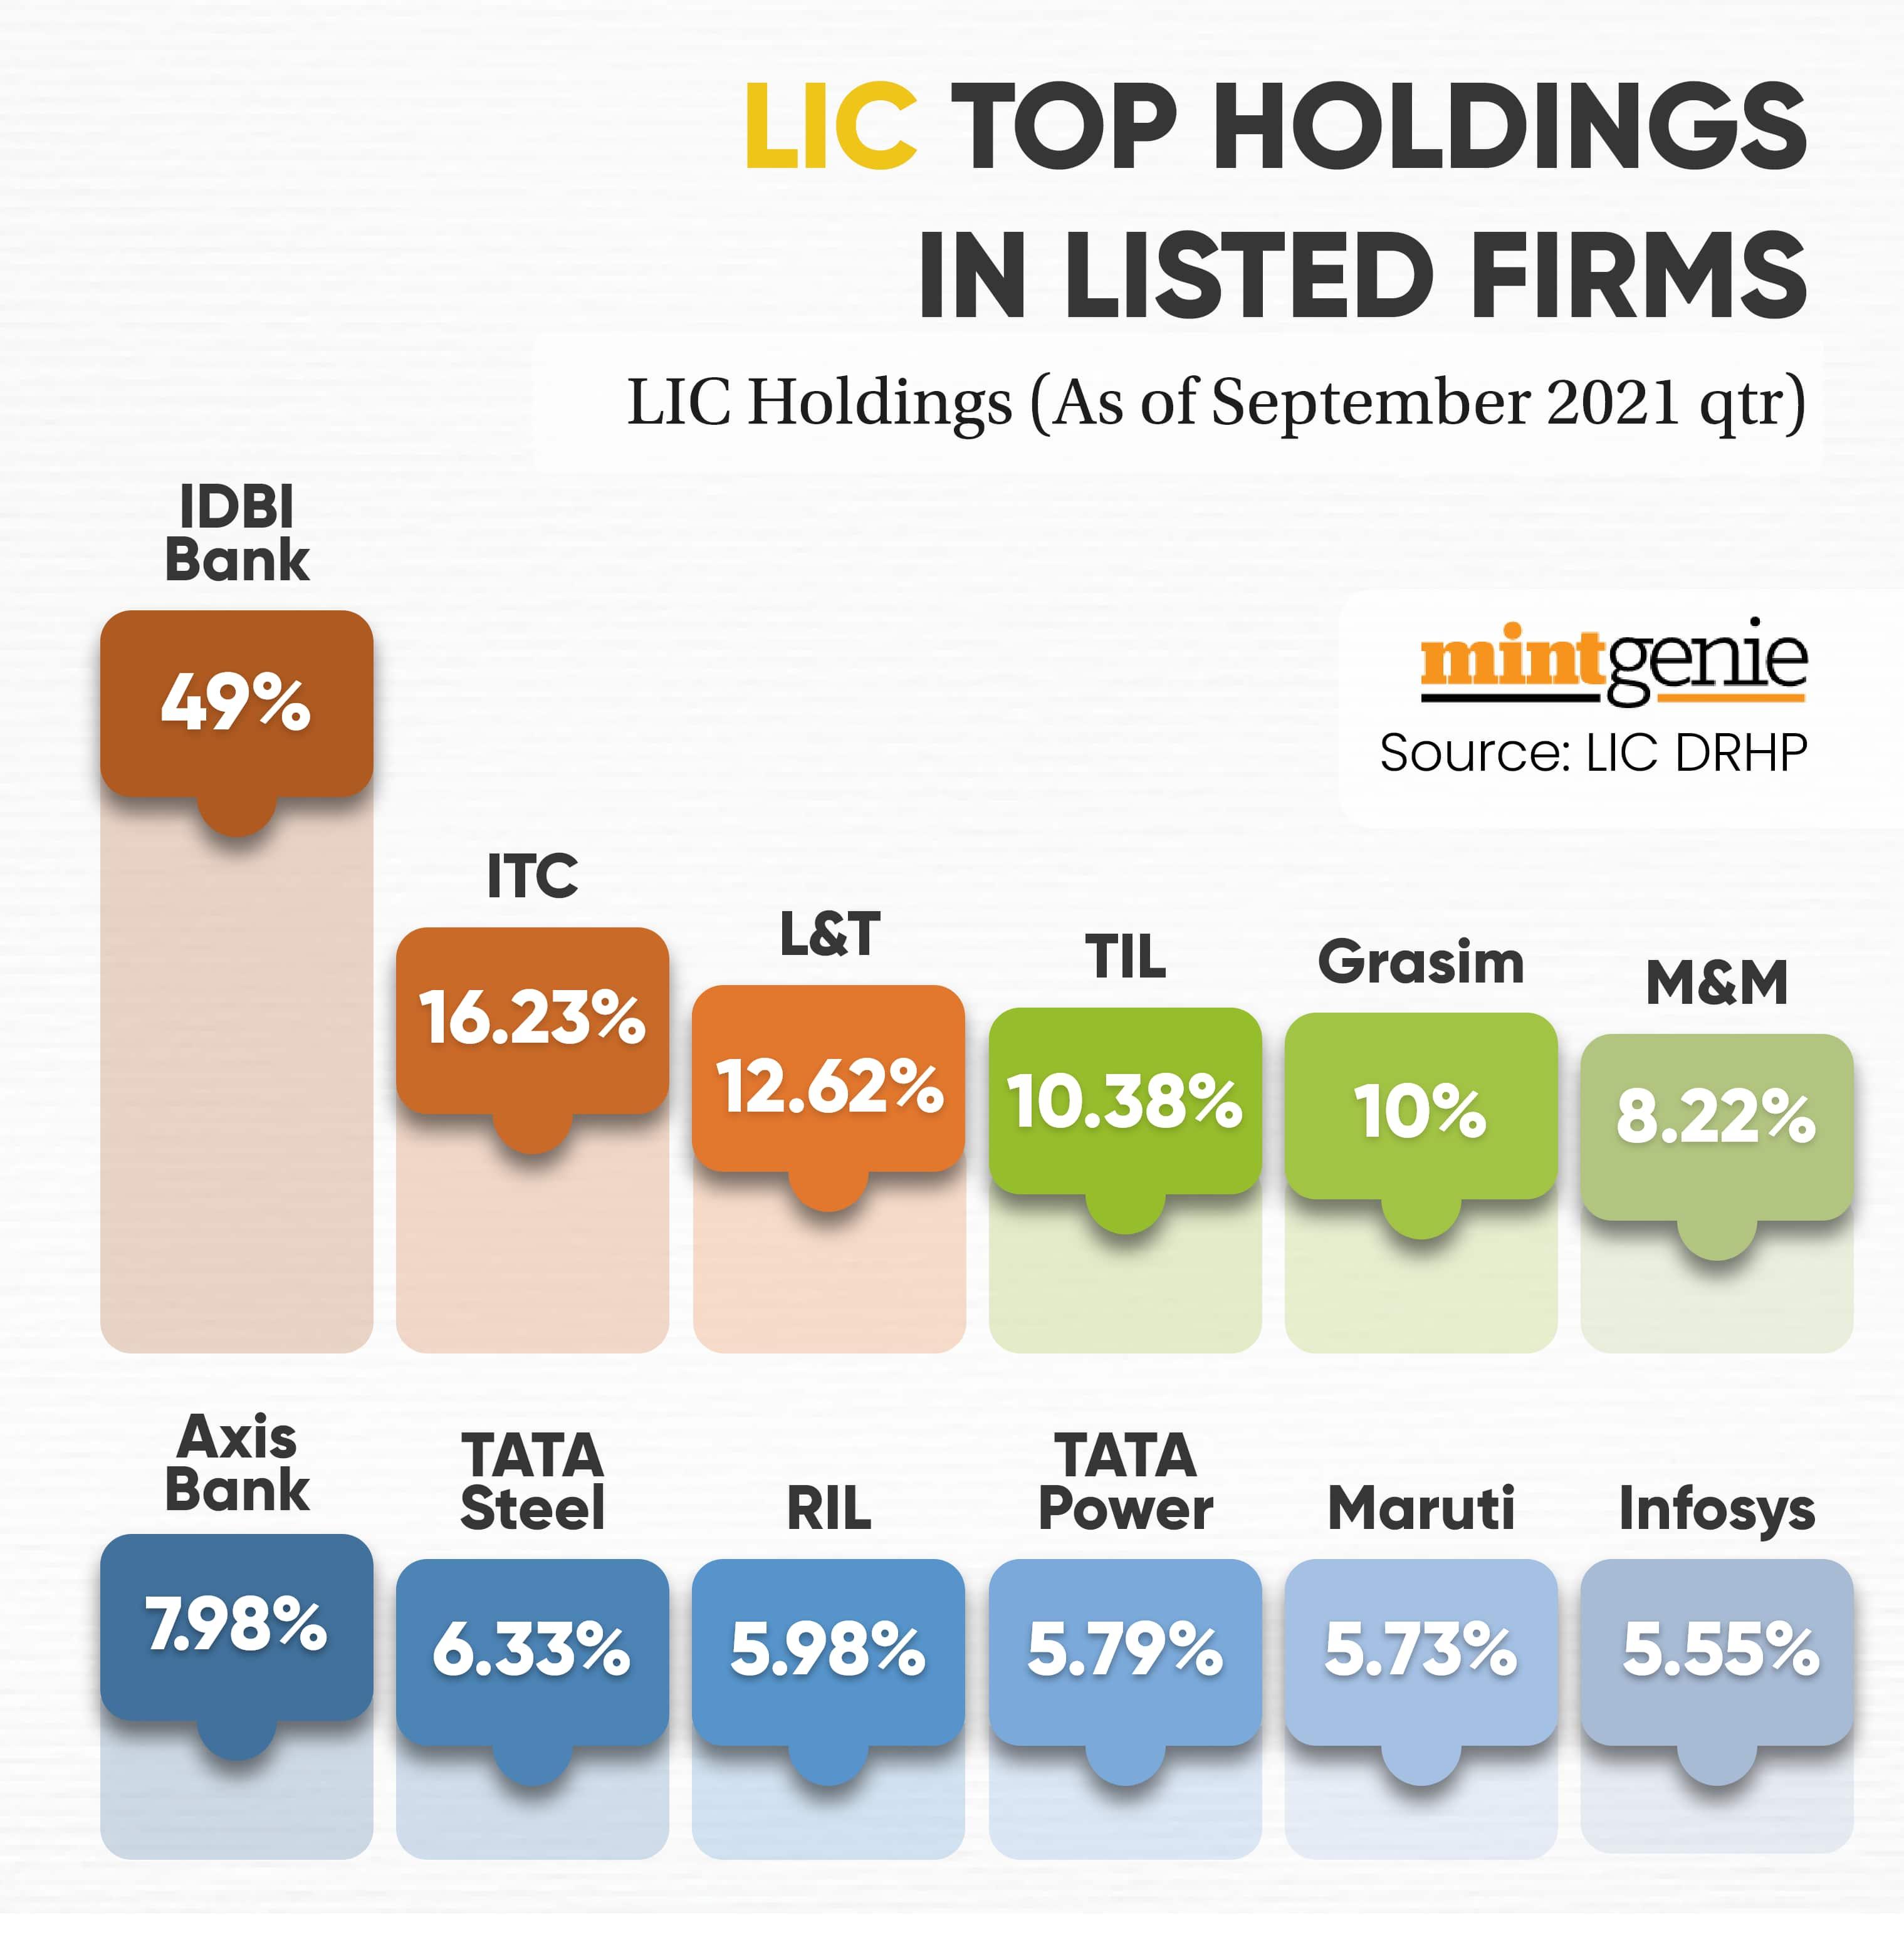 LIC top holdings in listed firms.